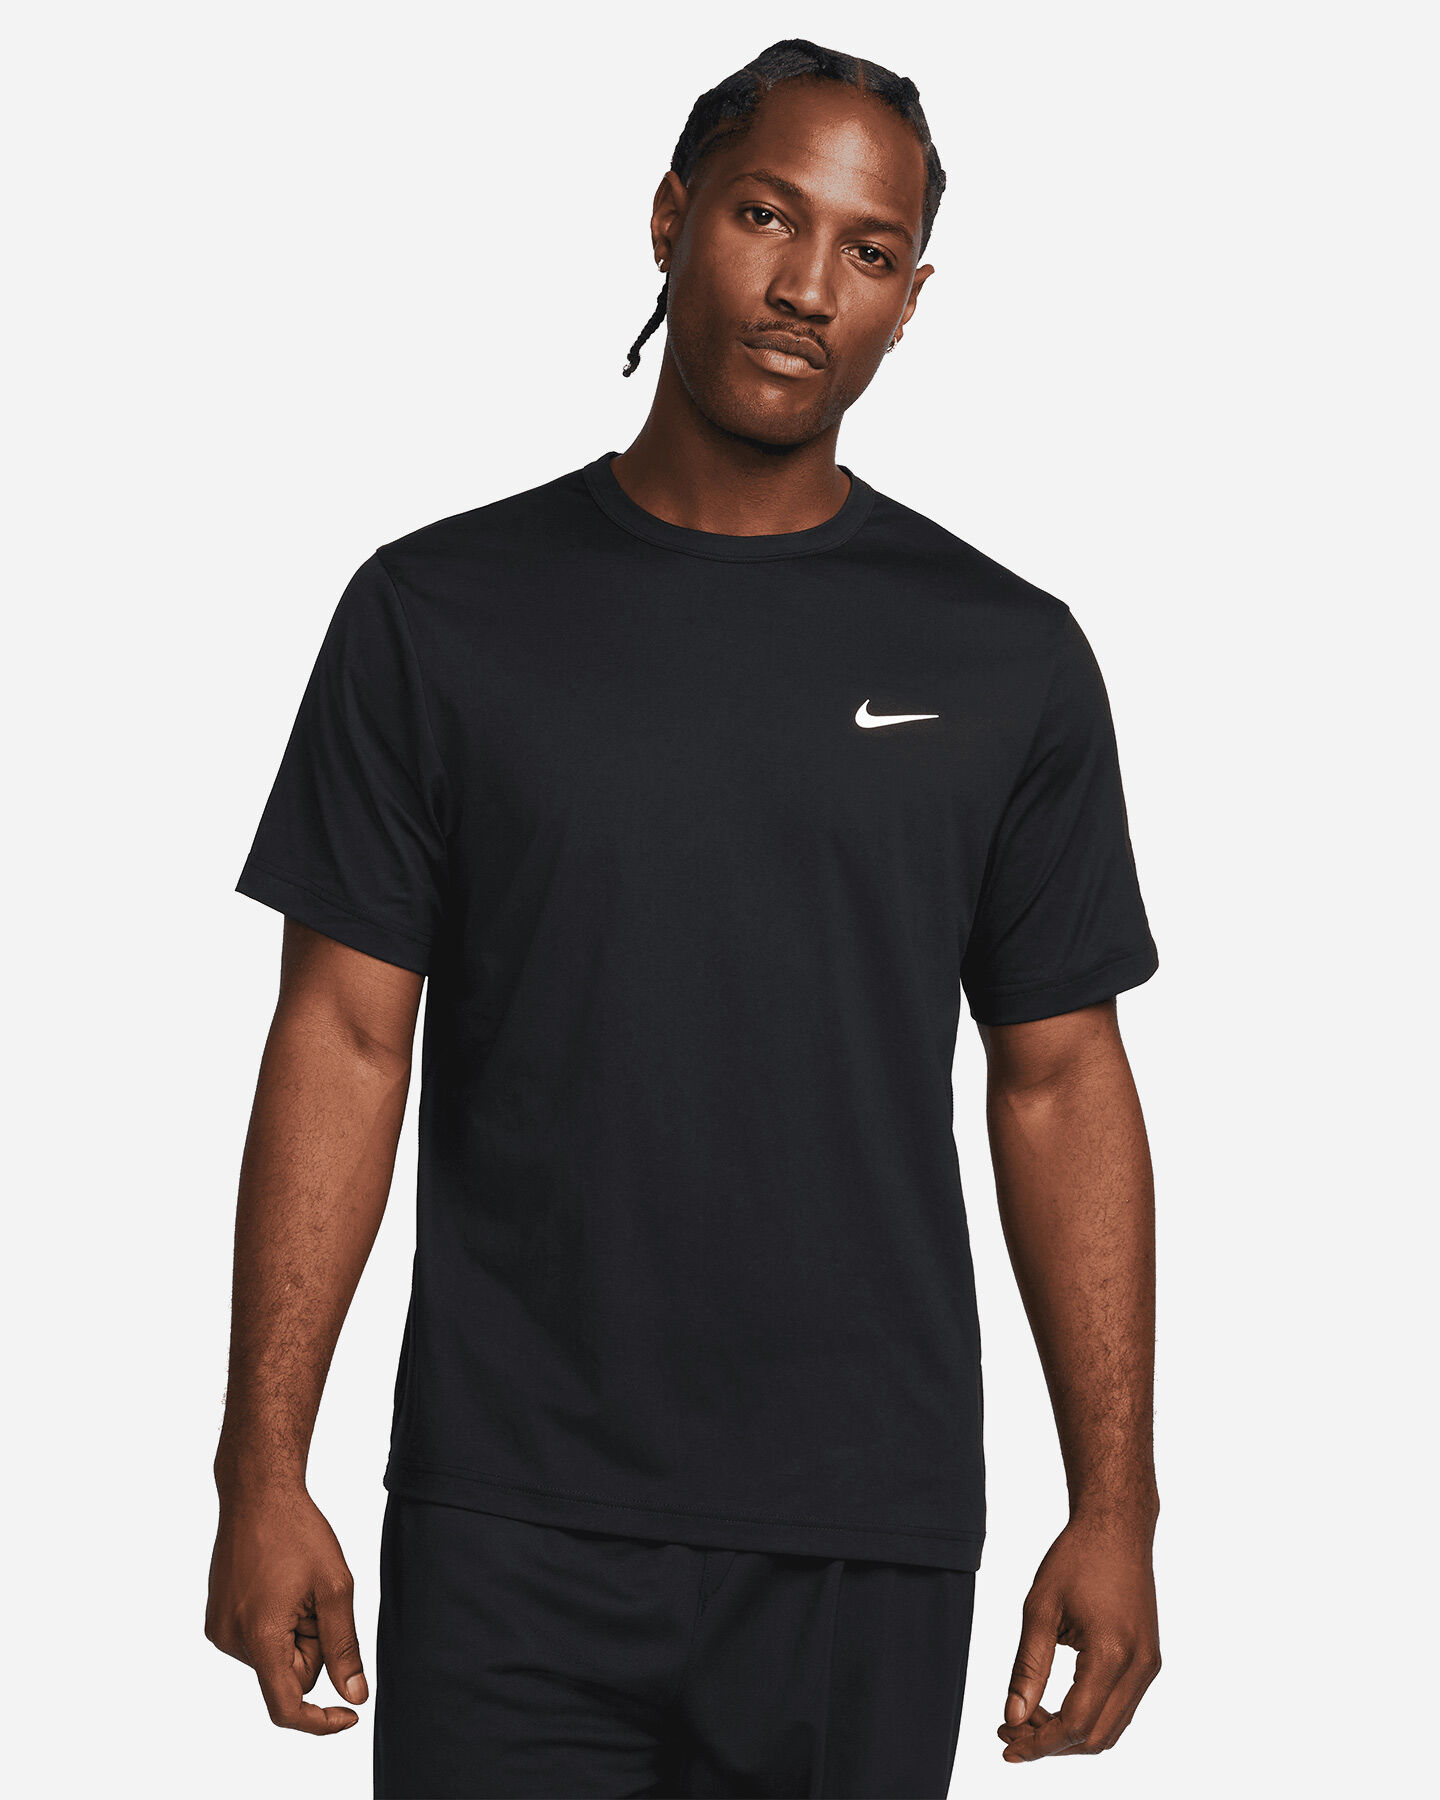  T-Shirt training NIKE DRI FIT HYVERSE M S5538682|010|S scatto 0